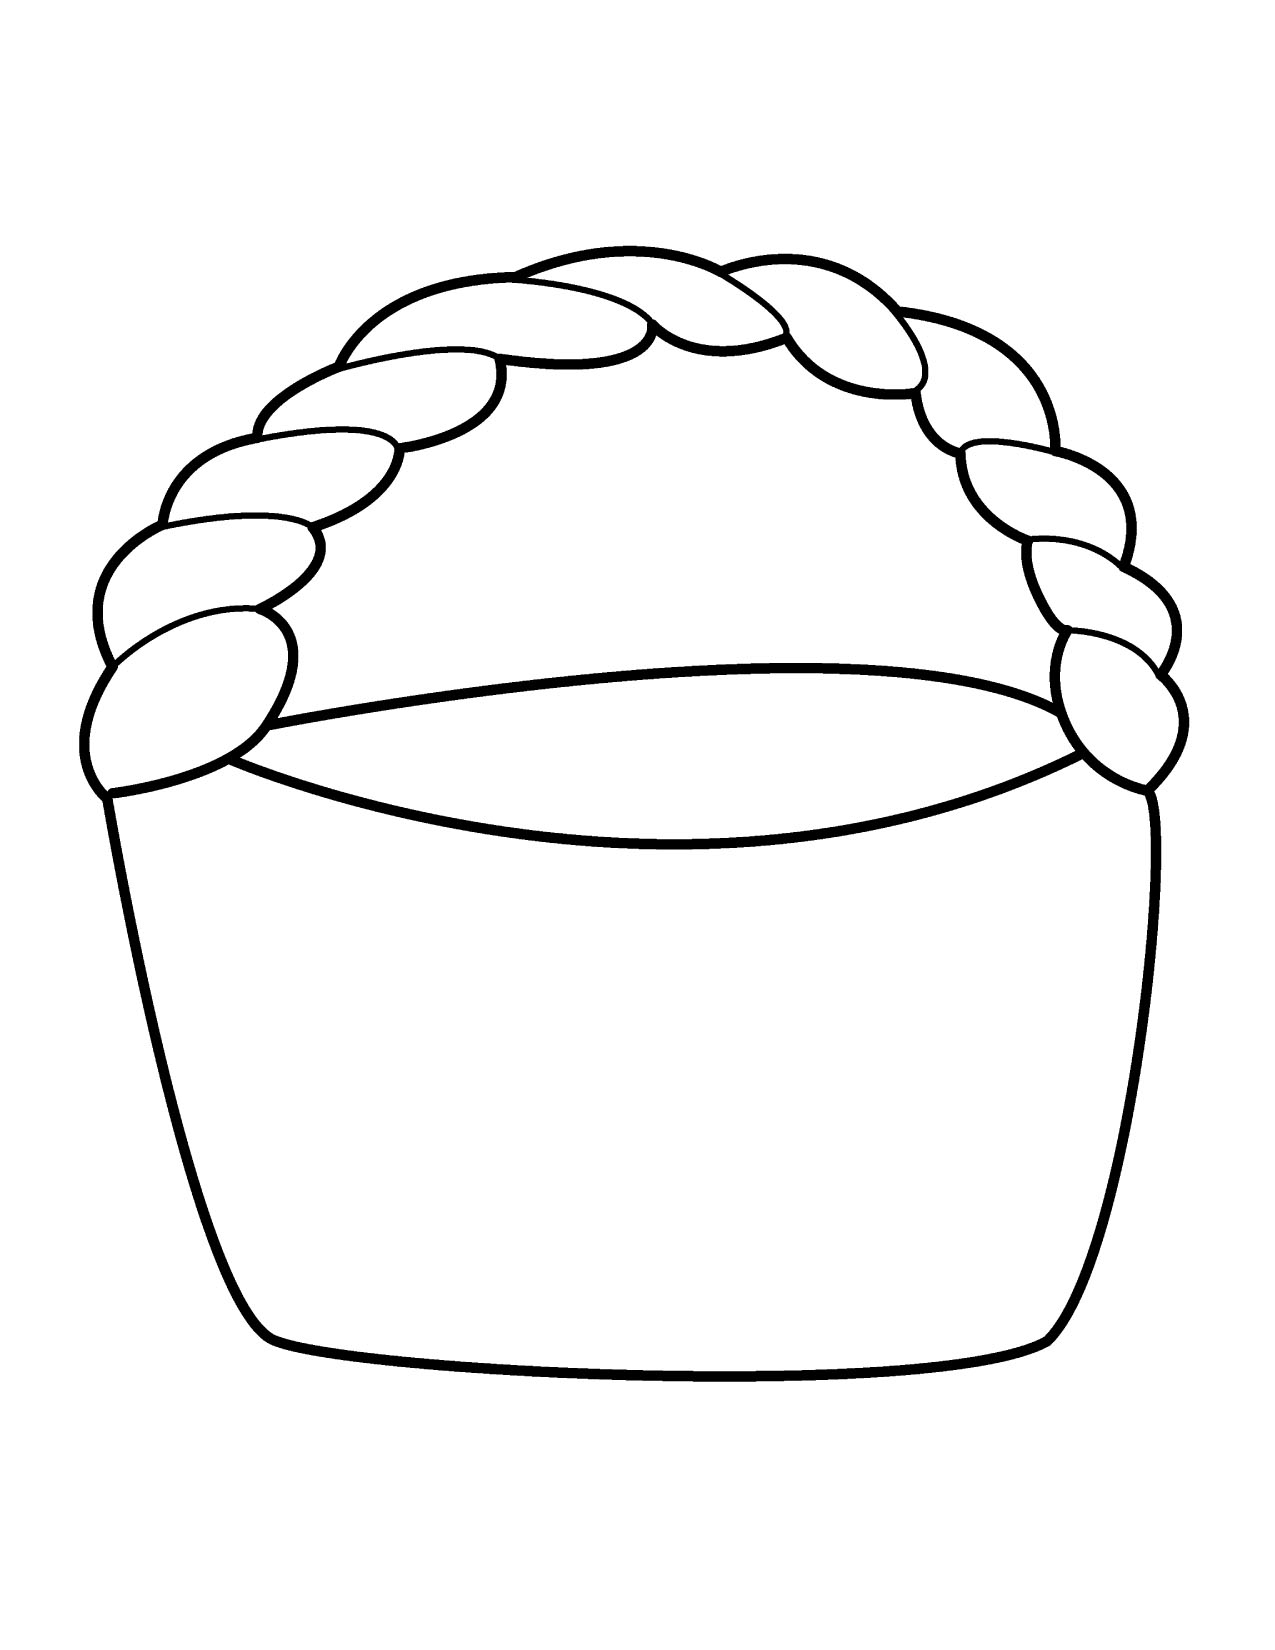 Bread Basket Clipart Black And White 